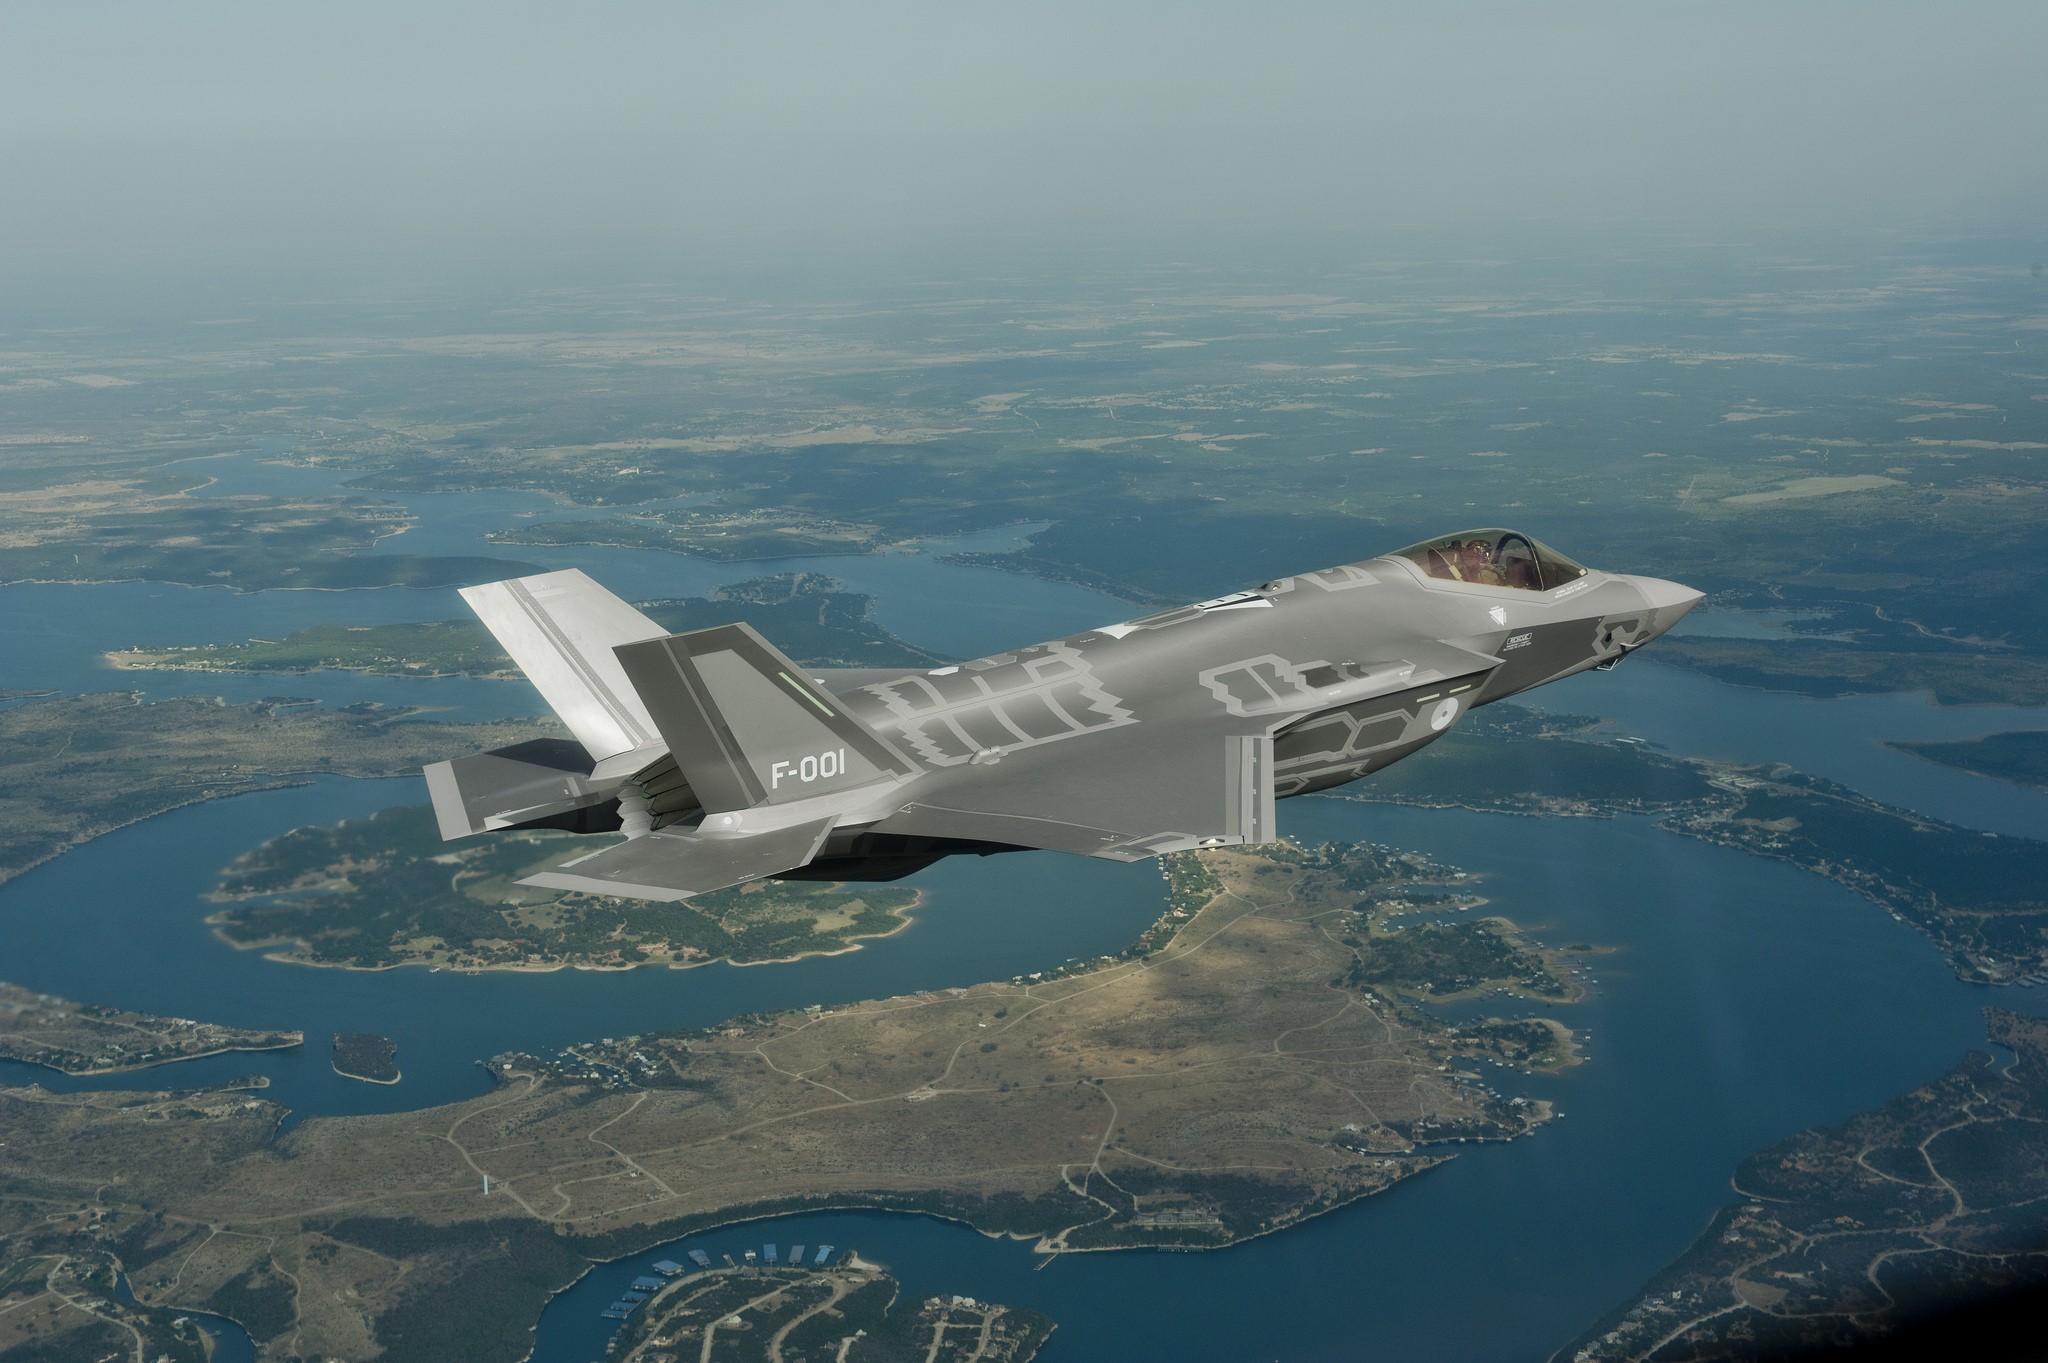 General 2048x1363 military aircraft aircraft Lockheed Martin F-35 Lightning II military military vehicle landscape aerial view American aircraft vehicle